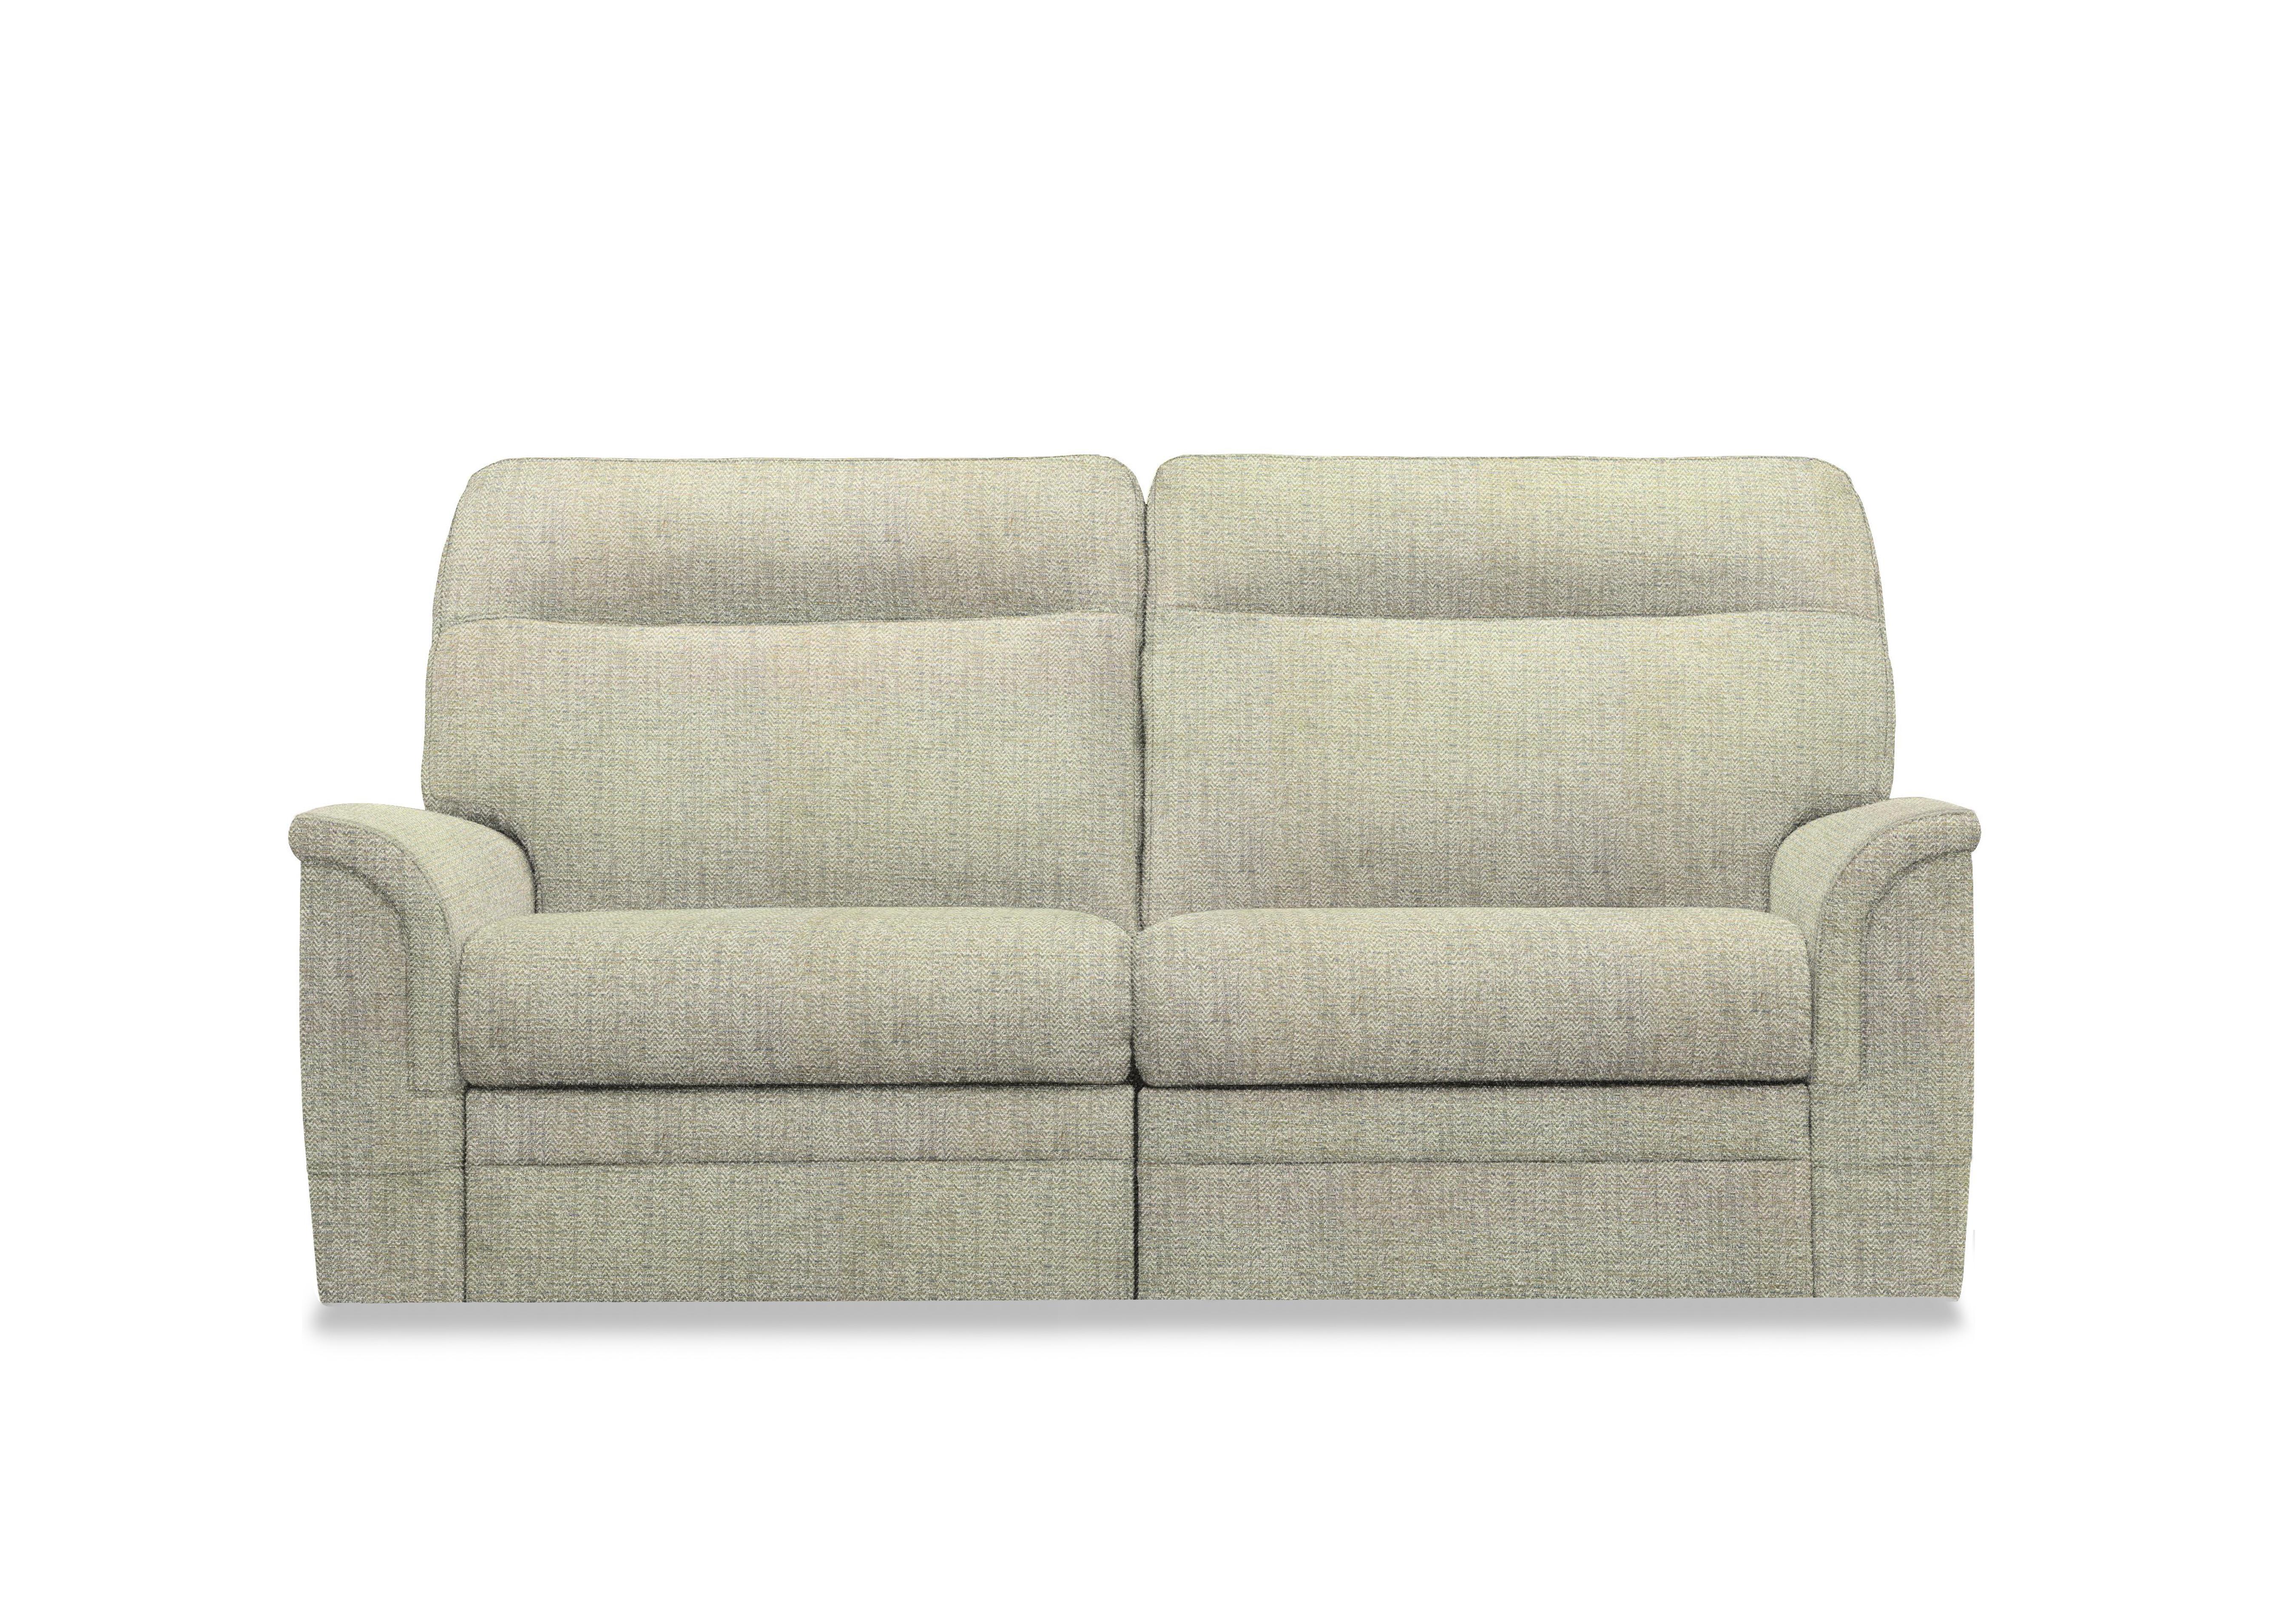 Hudson 23 Large 2 Seater Fabric Power Recliner Sofa with Power Headrests and Power Lumbar in Cromwell Mint 001355-0069 on Furniture Village